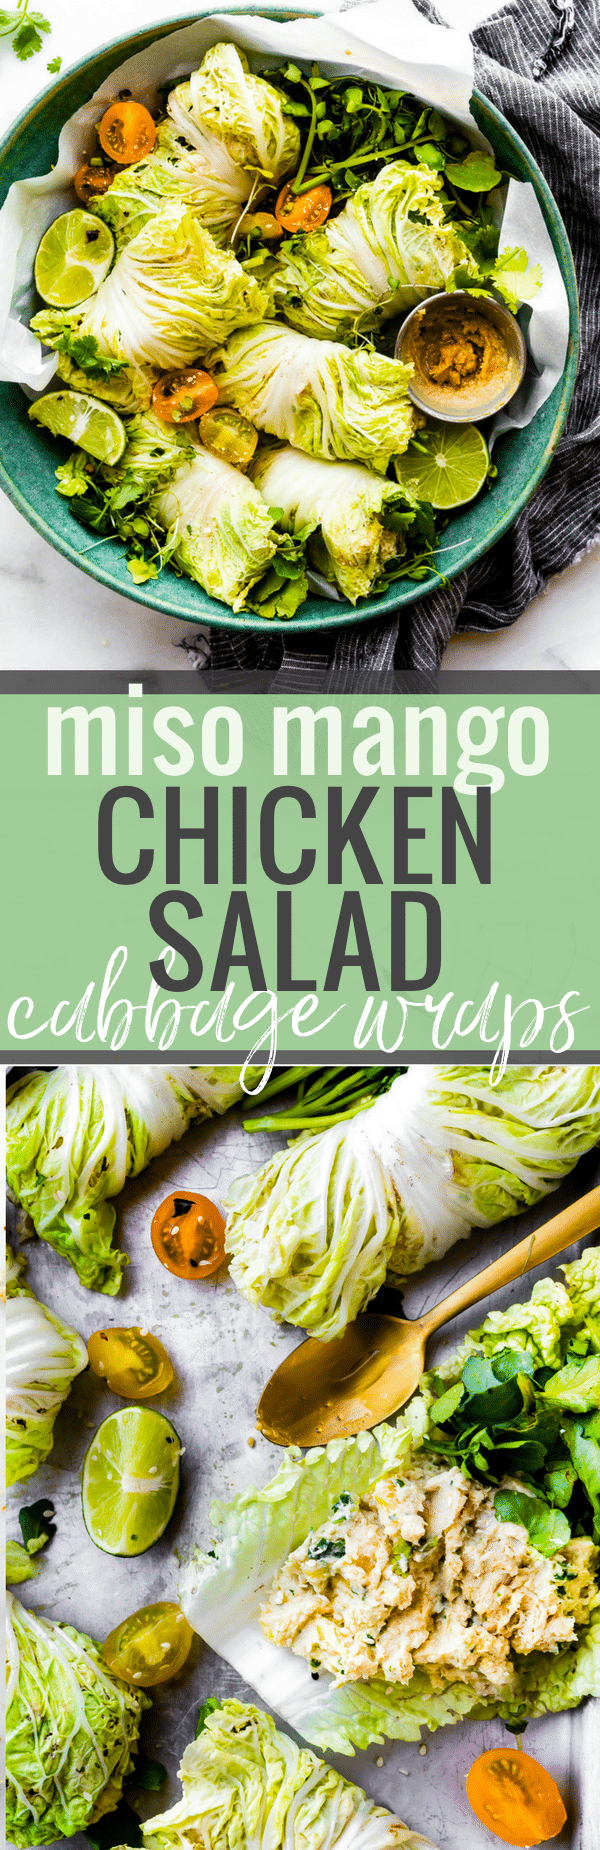 Miso Mango Chicken Salad Cabbage wraps are a light low carb lunch that's easy to make! A mango chicken salad that's mayo free, paleo friendly, flavorful! pread the miso mango chicken salad mixture over napa cabbage, add a little bit of watercress, then firmly roll up! www.cottercrunch.com